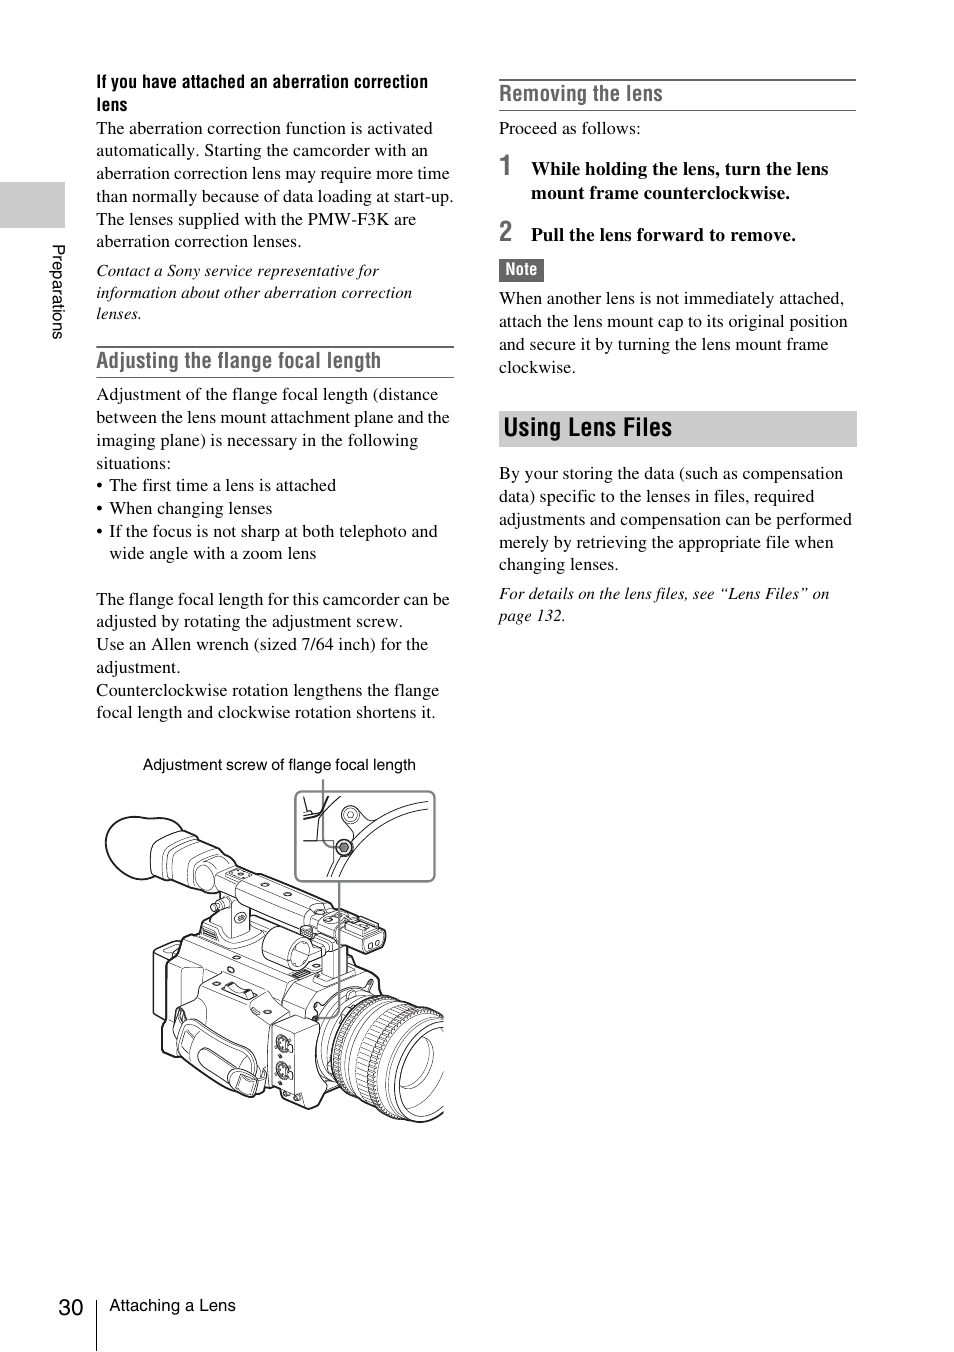 Using lens files, Adjusting the flange focal length, Removing the lens | Pull the lens forward to remove | Sony PMW-F3K User Manual | Page 30 / 164